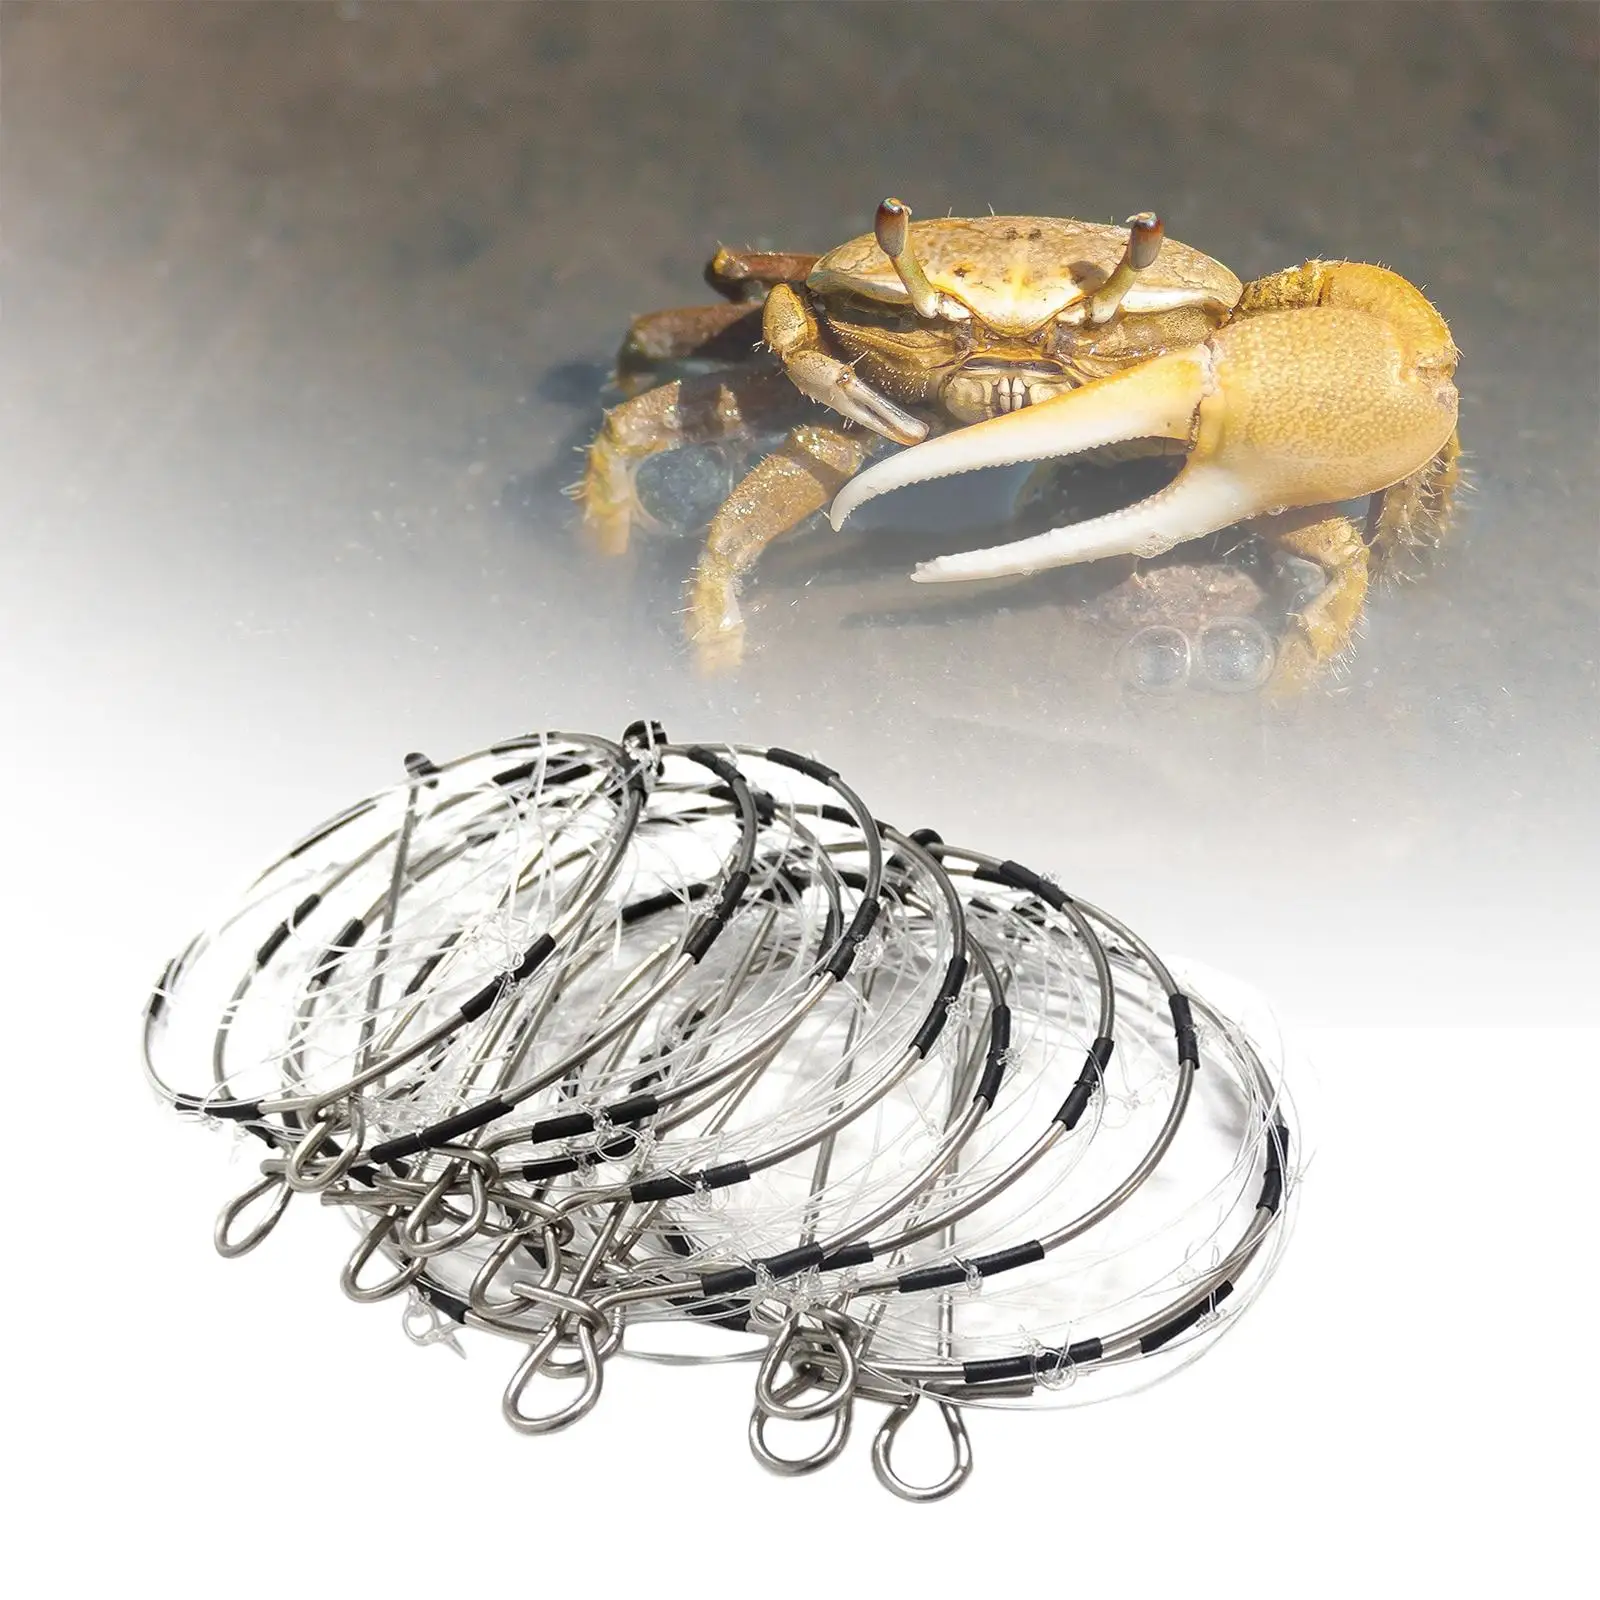 10x Crab Trap Repeated Use Catch Crabs Tool for shrimp Lobster Crawfish